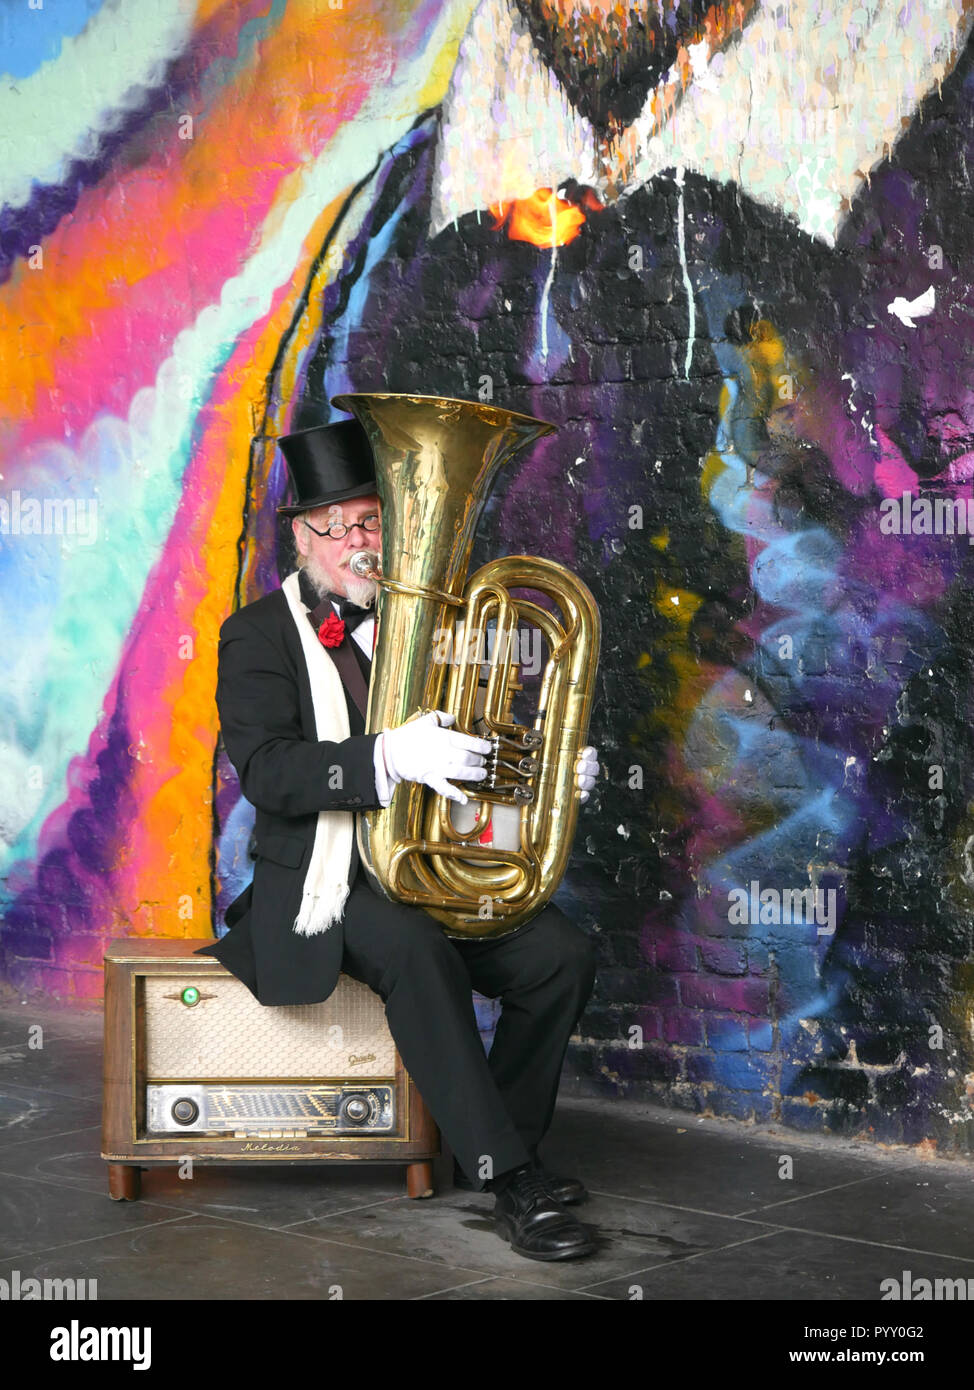 Elderly man playing a tuba shooting fire from the top Stock Photo